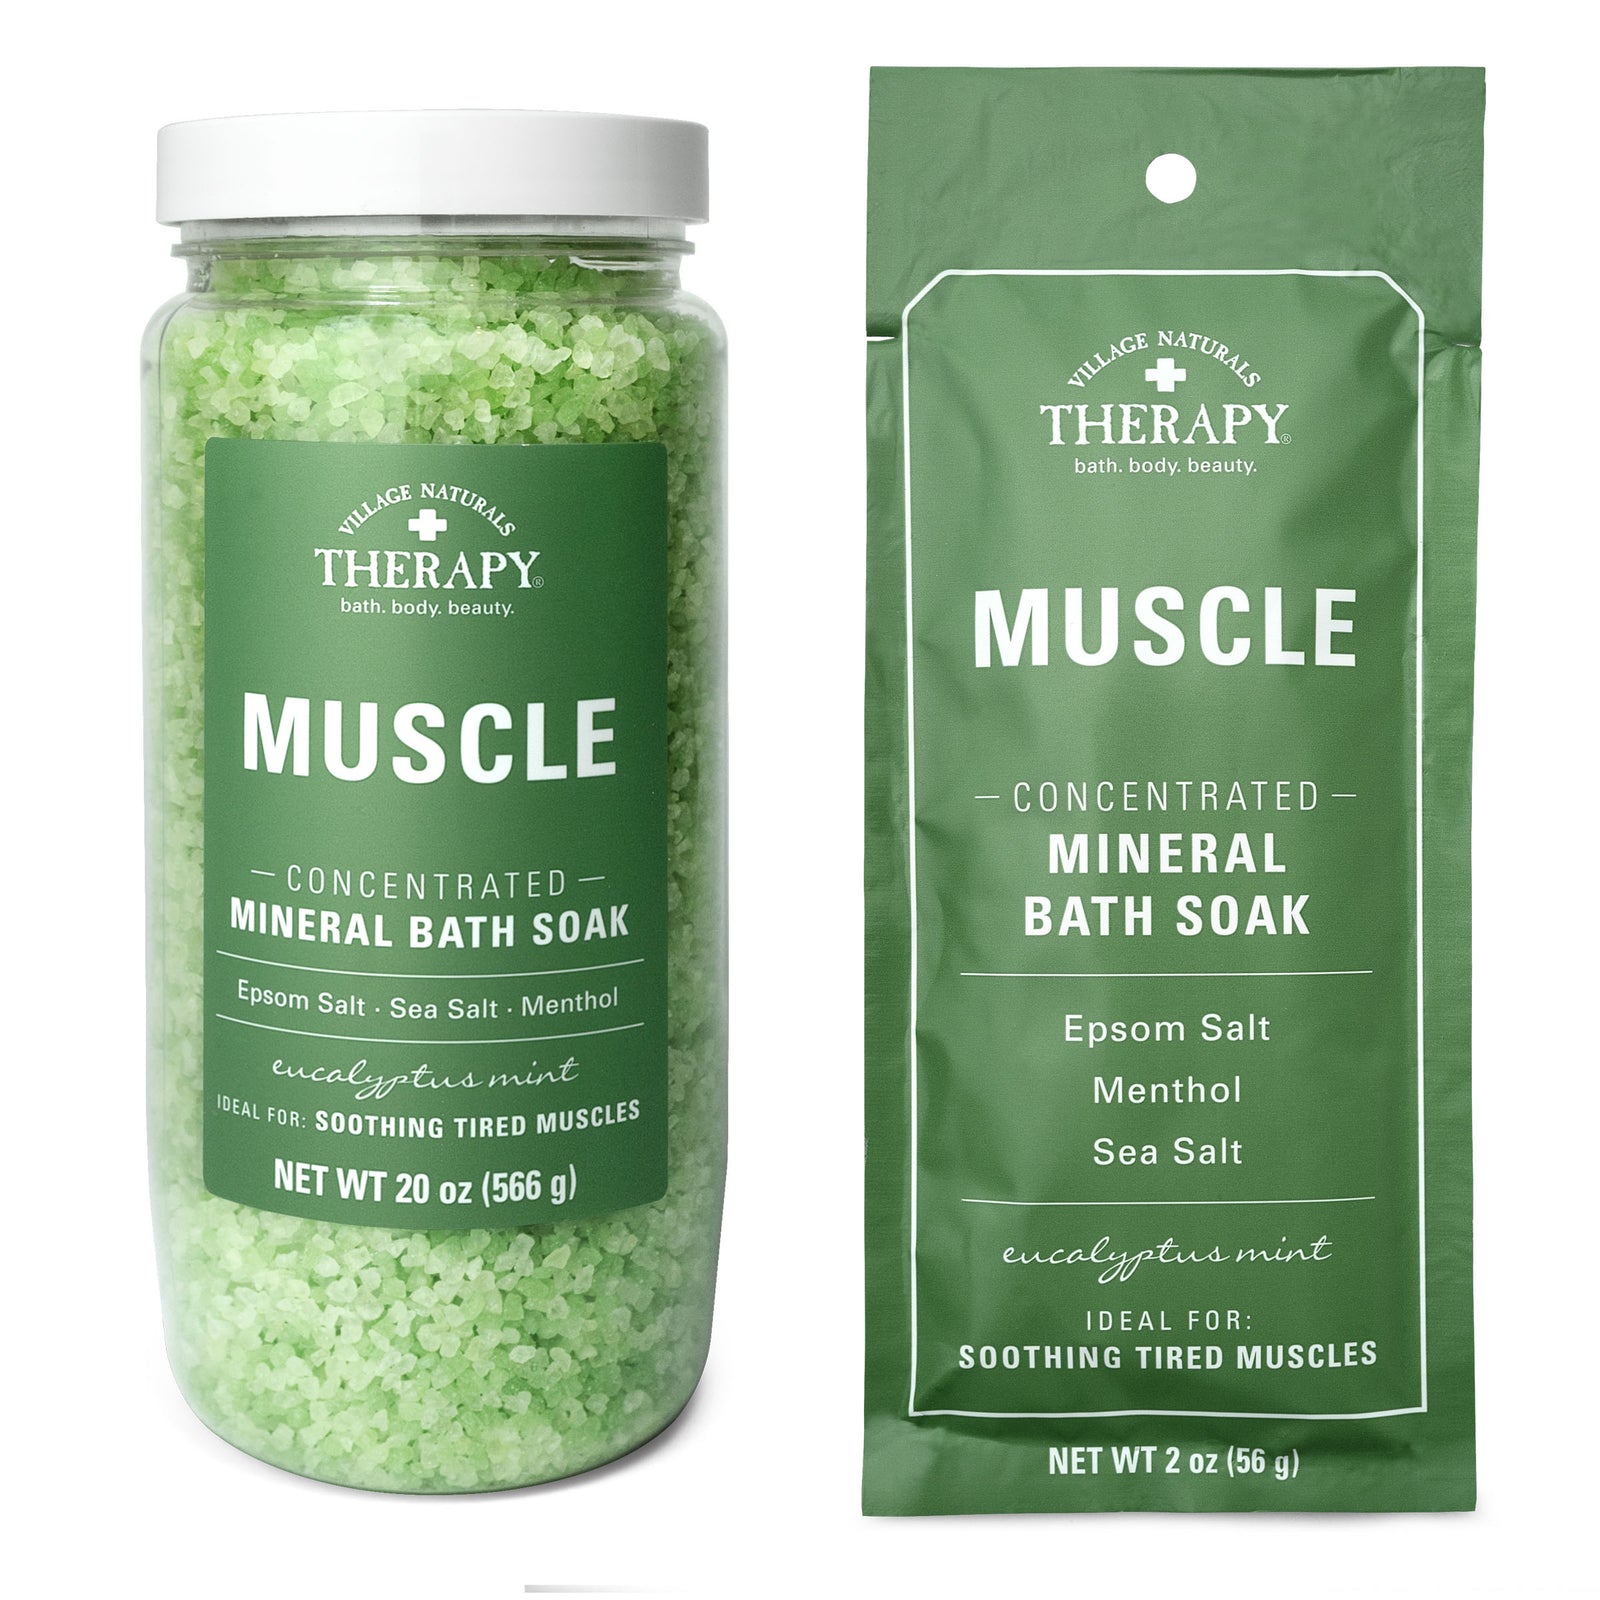 Muscle Relief Concentrated Mineral Bath Soak